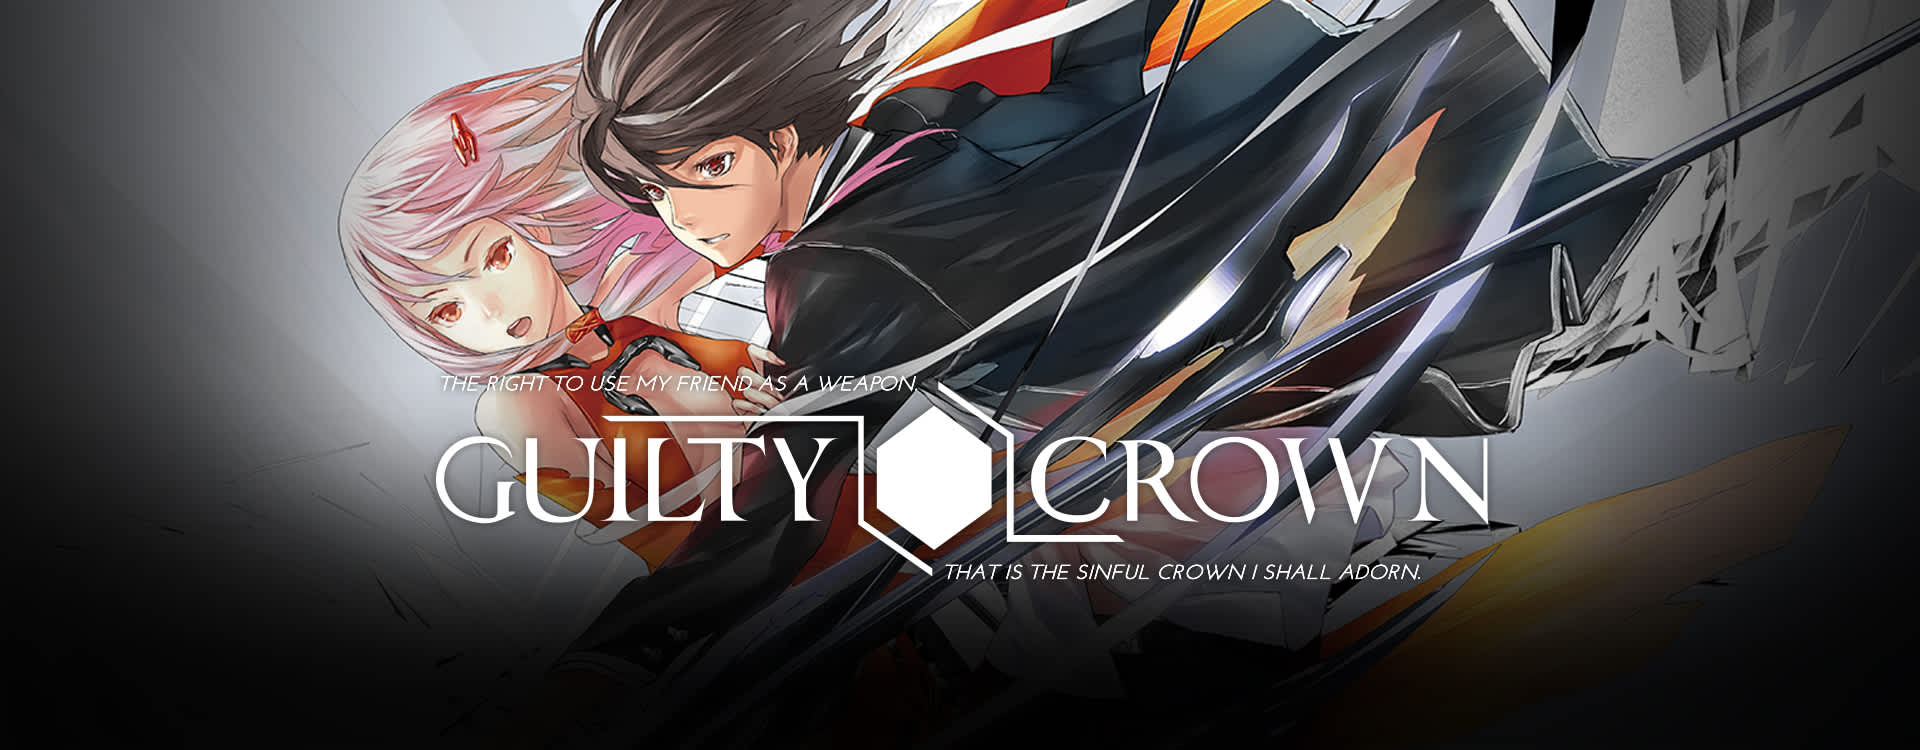 download guilty crown movie for free